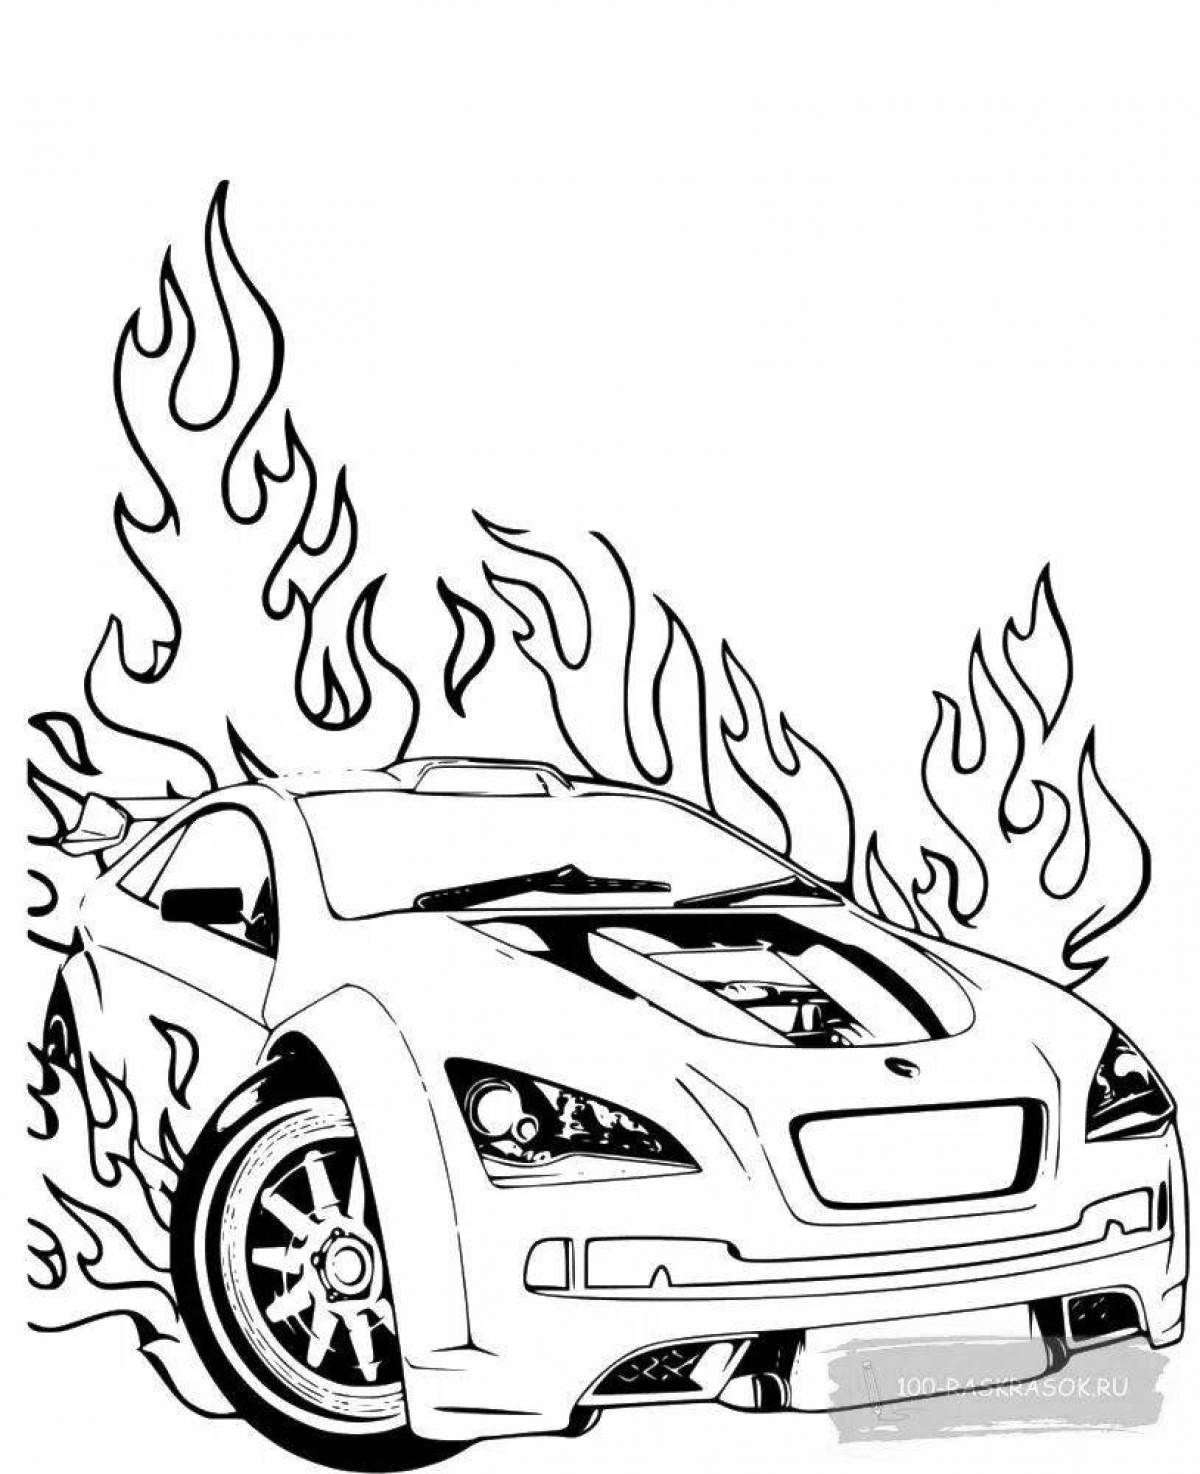 Great car coloring book for boys